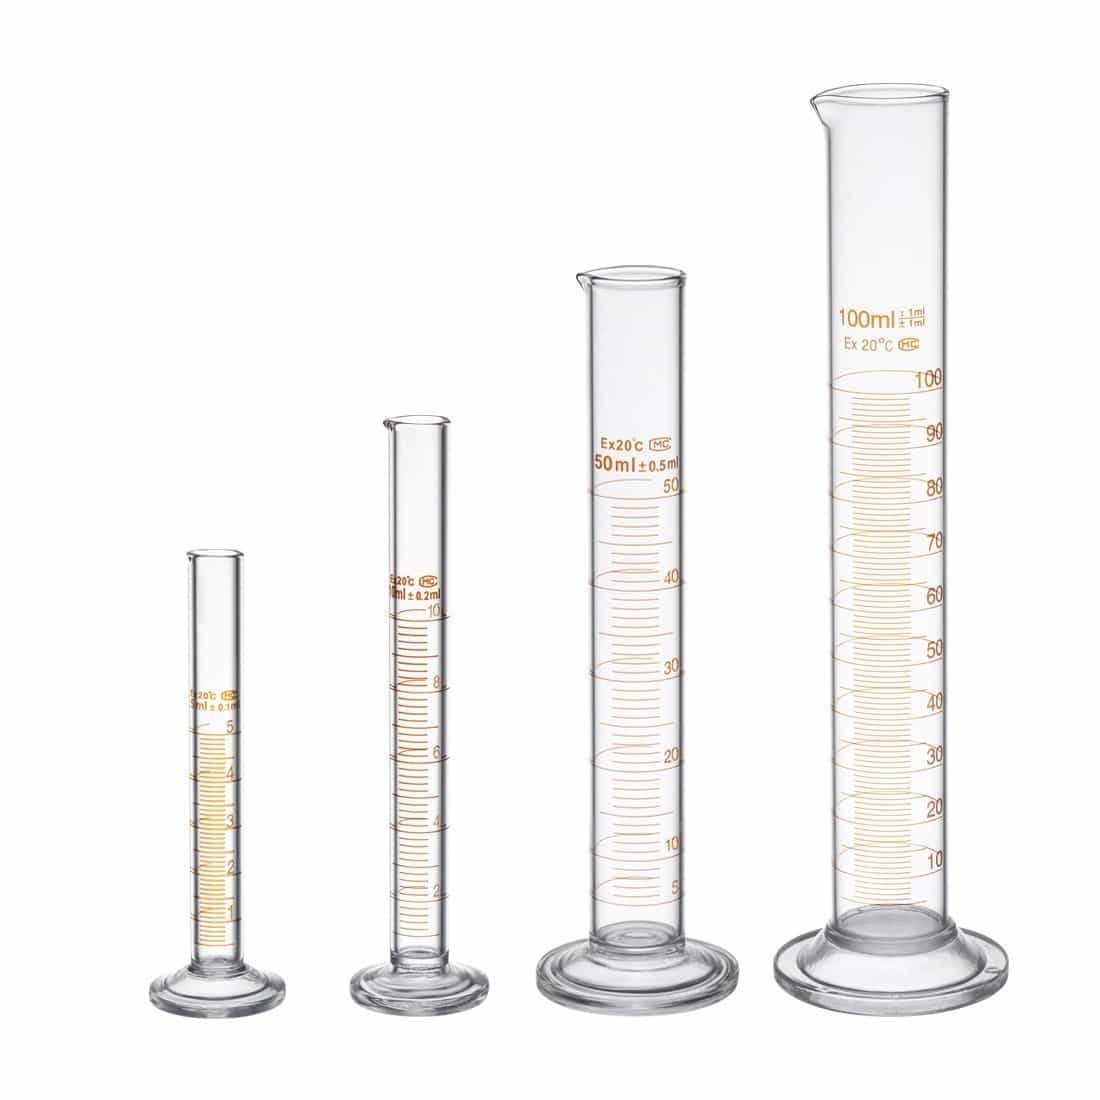 LIGHTNING DEAL ALERT! Thick Glass Graduated Measuring Cylinder Set 5ml 10ml 50ml 100ml Glass with Two Brushes  – 45% off!